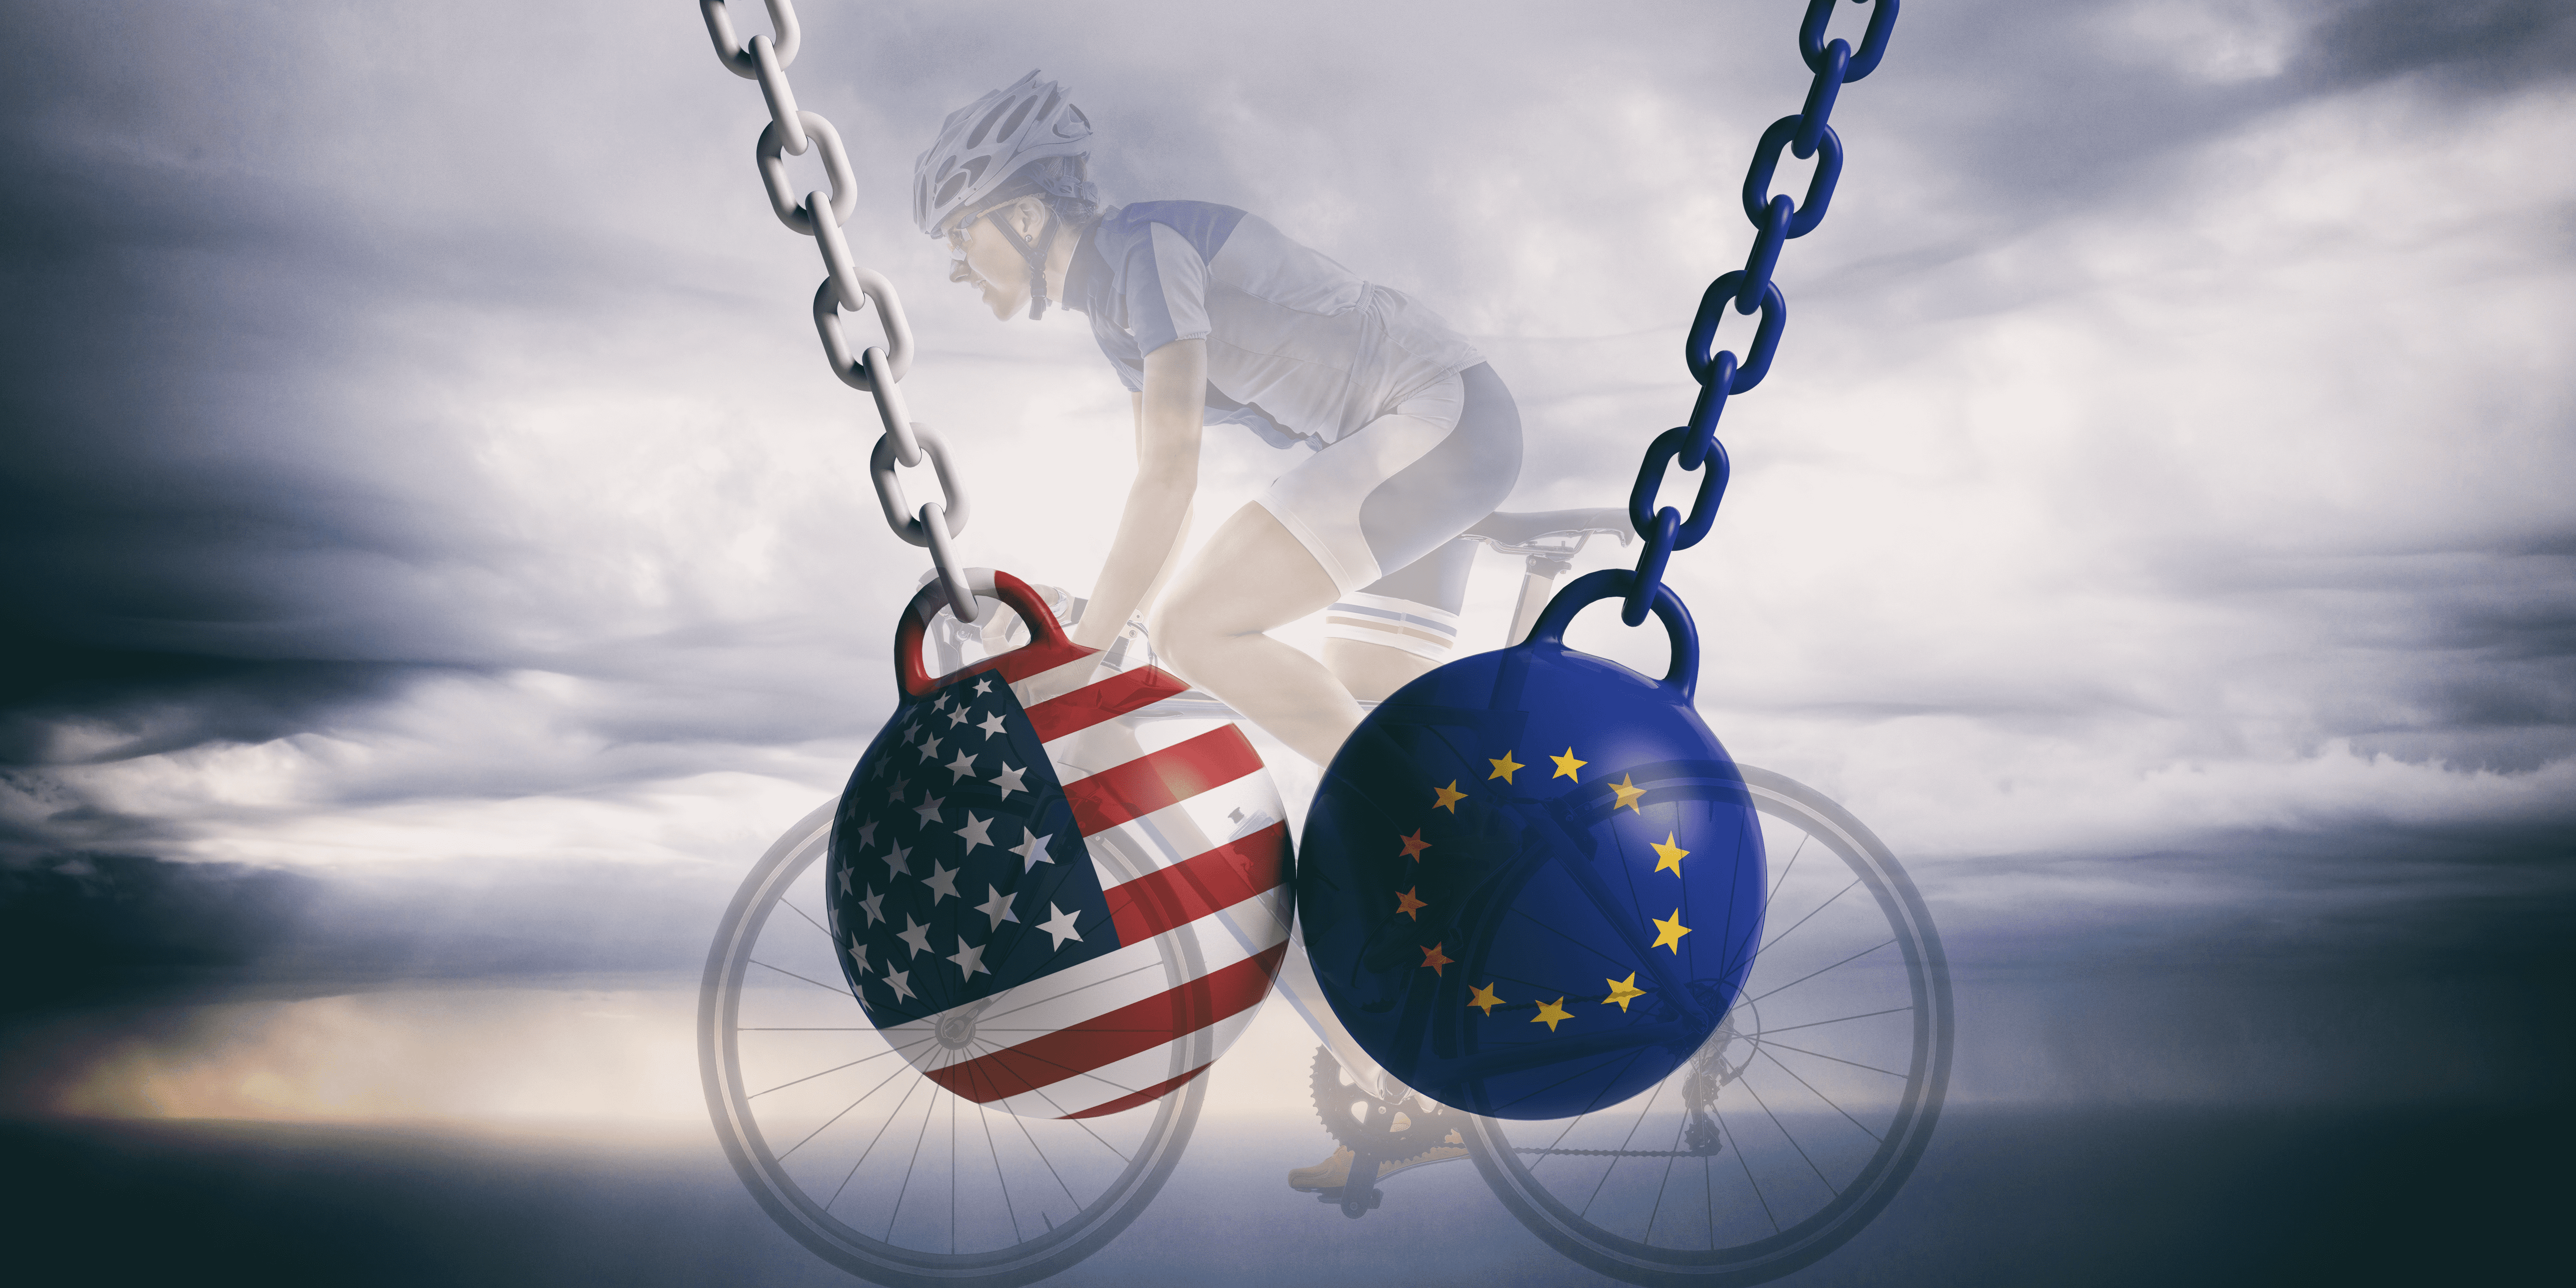 Is Cycling More Dangerous in the U.S. Than in Europe?